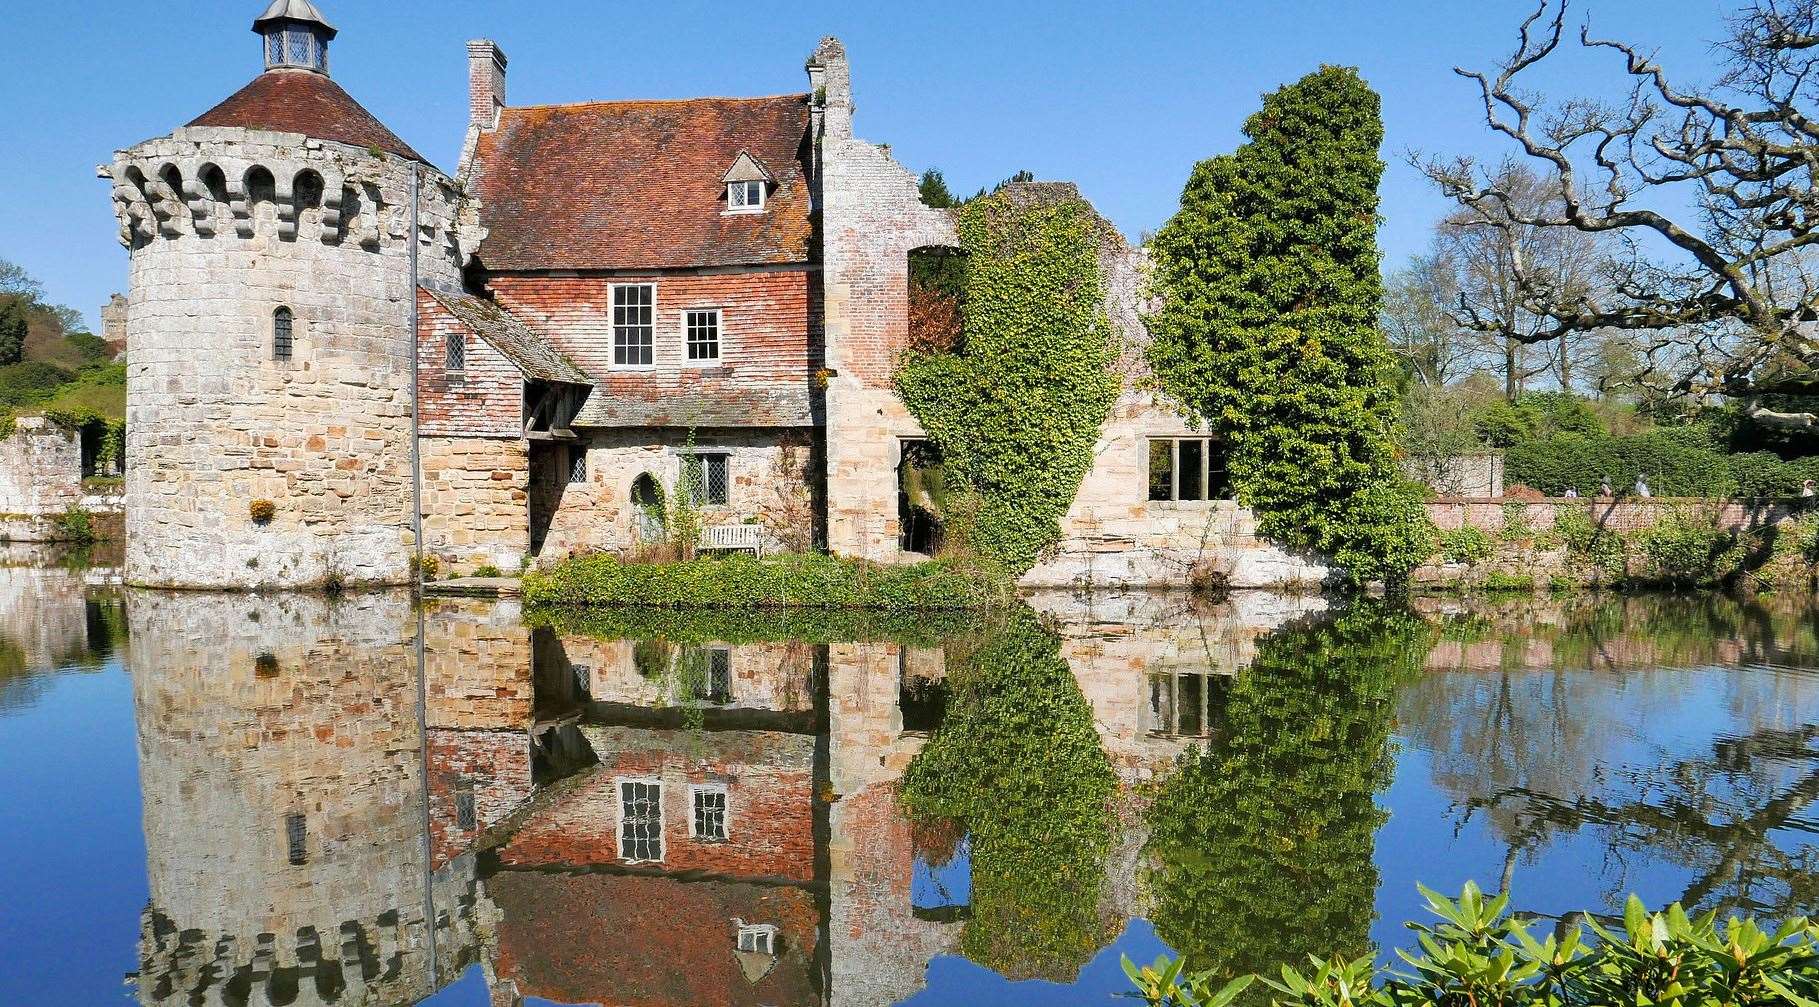 Scotney Castle, owned by the National Trust, is close to Lamberhurst, one of the Kent neighbourhoods with a million pound property market Picture: Tom Lee, Flickr